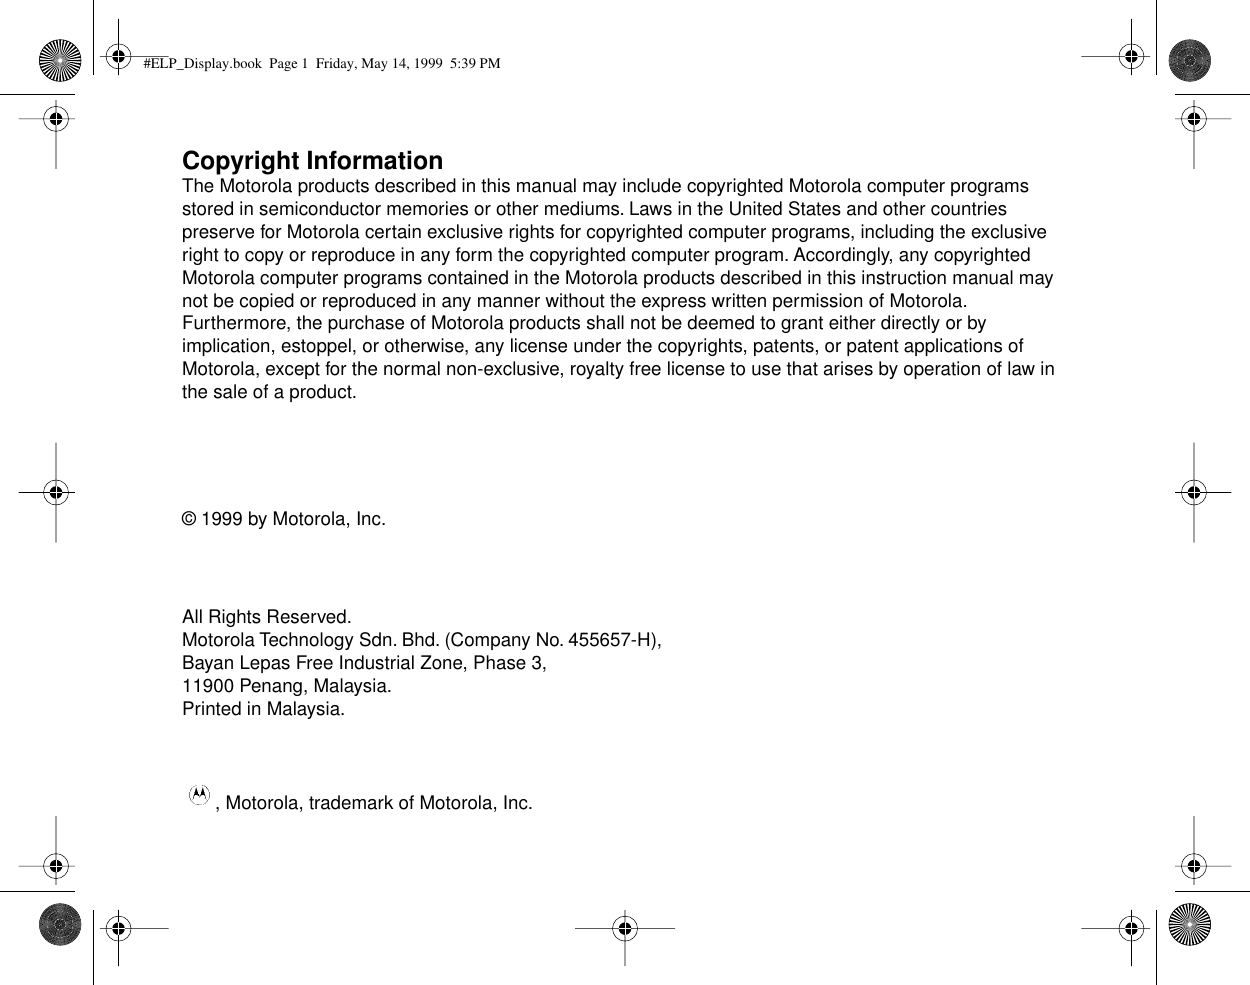  Copyright Information The Motorola products described in this manual may include copyrighted Motorola computer programs stored in semiconductor memories or other mediums. Laws in the United States and other countries preserve for Motorola certain exclusive rights for copyrighted computer programs, including the exclusive right to copy or reproduce in any form the copyrighted computer program. Accordingly, any copyrighted Motorola computer programs contained in the Motorola products described in this instruction manual may not be copied or reproduced in any manner without the express written permission of Motorola. Furthermore, the purchase of Motorola products shall not be deemed to grant either directly or by implication, estoppel, or otherwise, any license under the copyrights, patents, or patent applications of Motorola, except for the normal non-exclusive, royalty free license to use that arises by operation of law in the sale of a product.© 1999 by Motorola, Inc.All Rights Reserved.Motorola Technology Sdn. Bhd. (Company No. 455657-H),Bayan Lepas Free Industrial Zone, Phase 3,11900 Penang, Malaysia.Printed in Malaysia., Motorola, trademark of Motorola, Inc. #ELP_Display.book  Page 1  Friday, May 14, 1999  5:39 PM